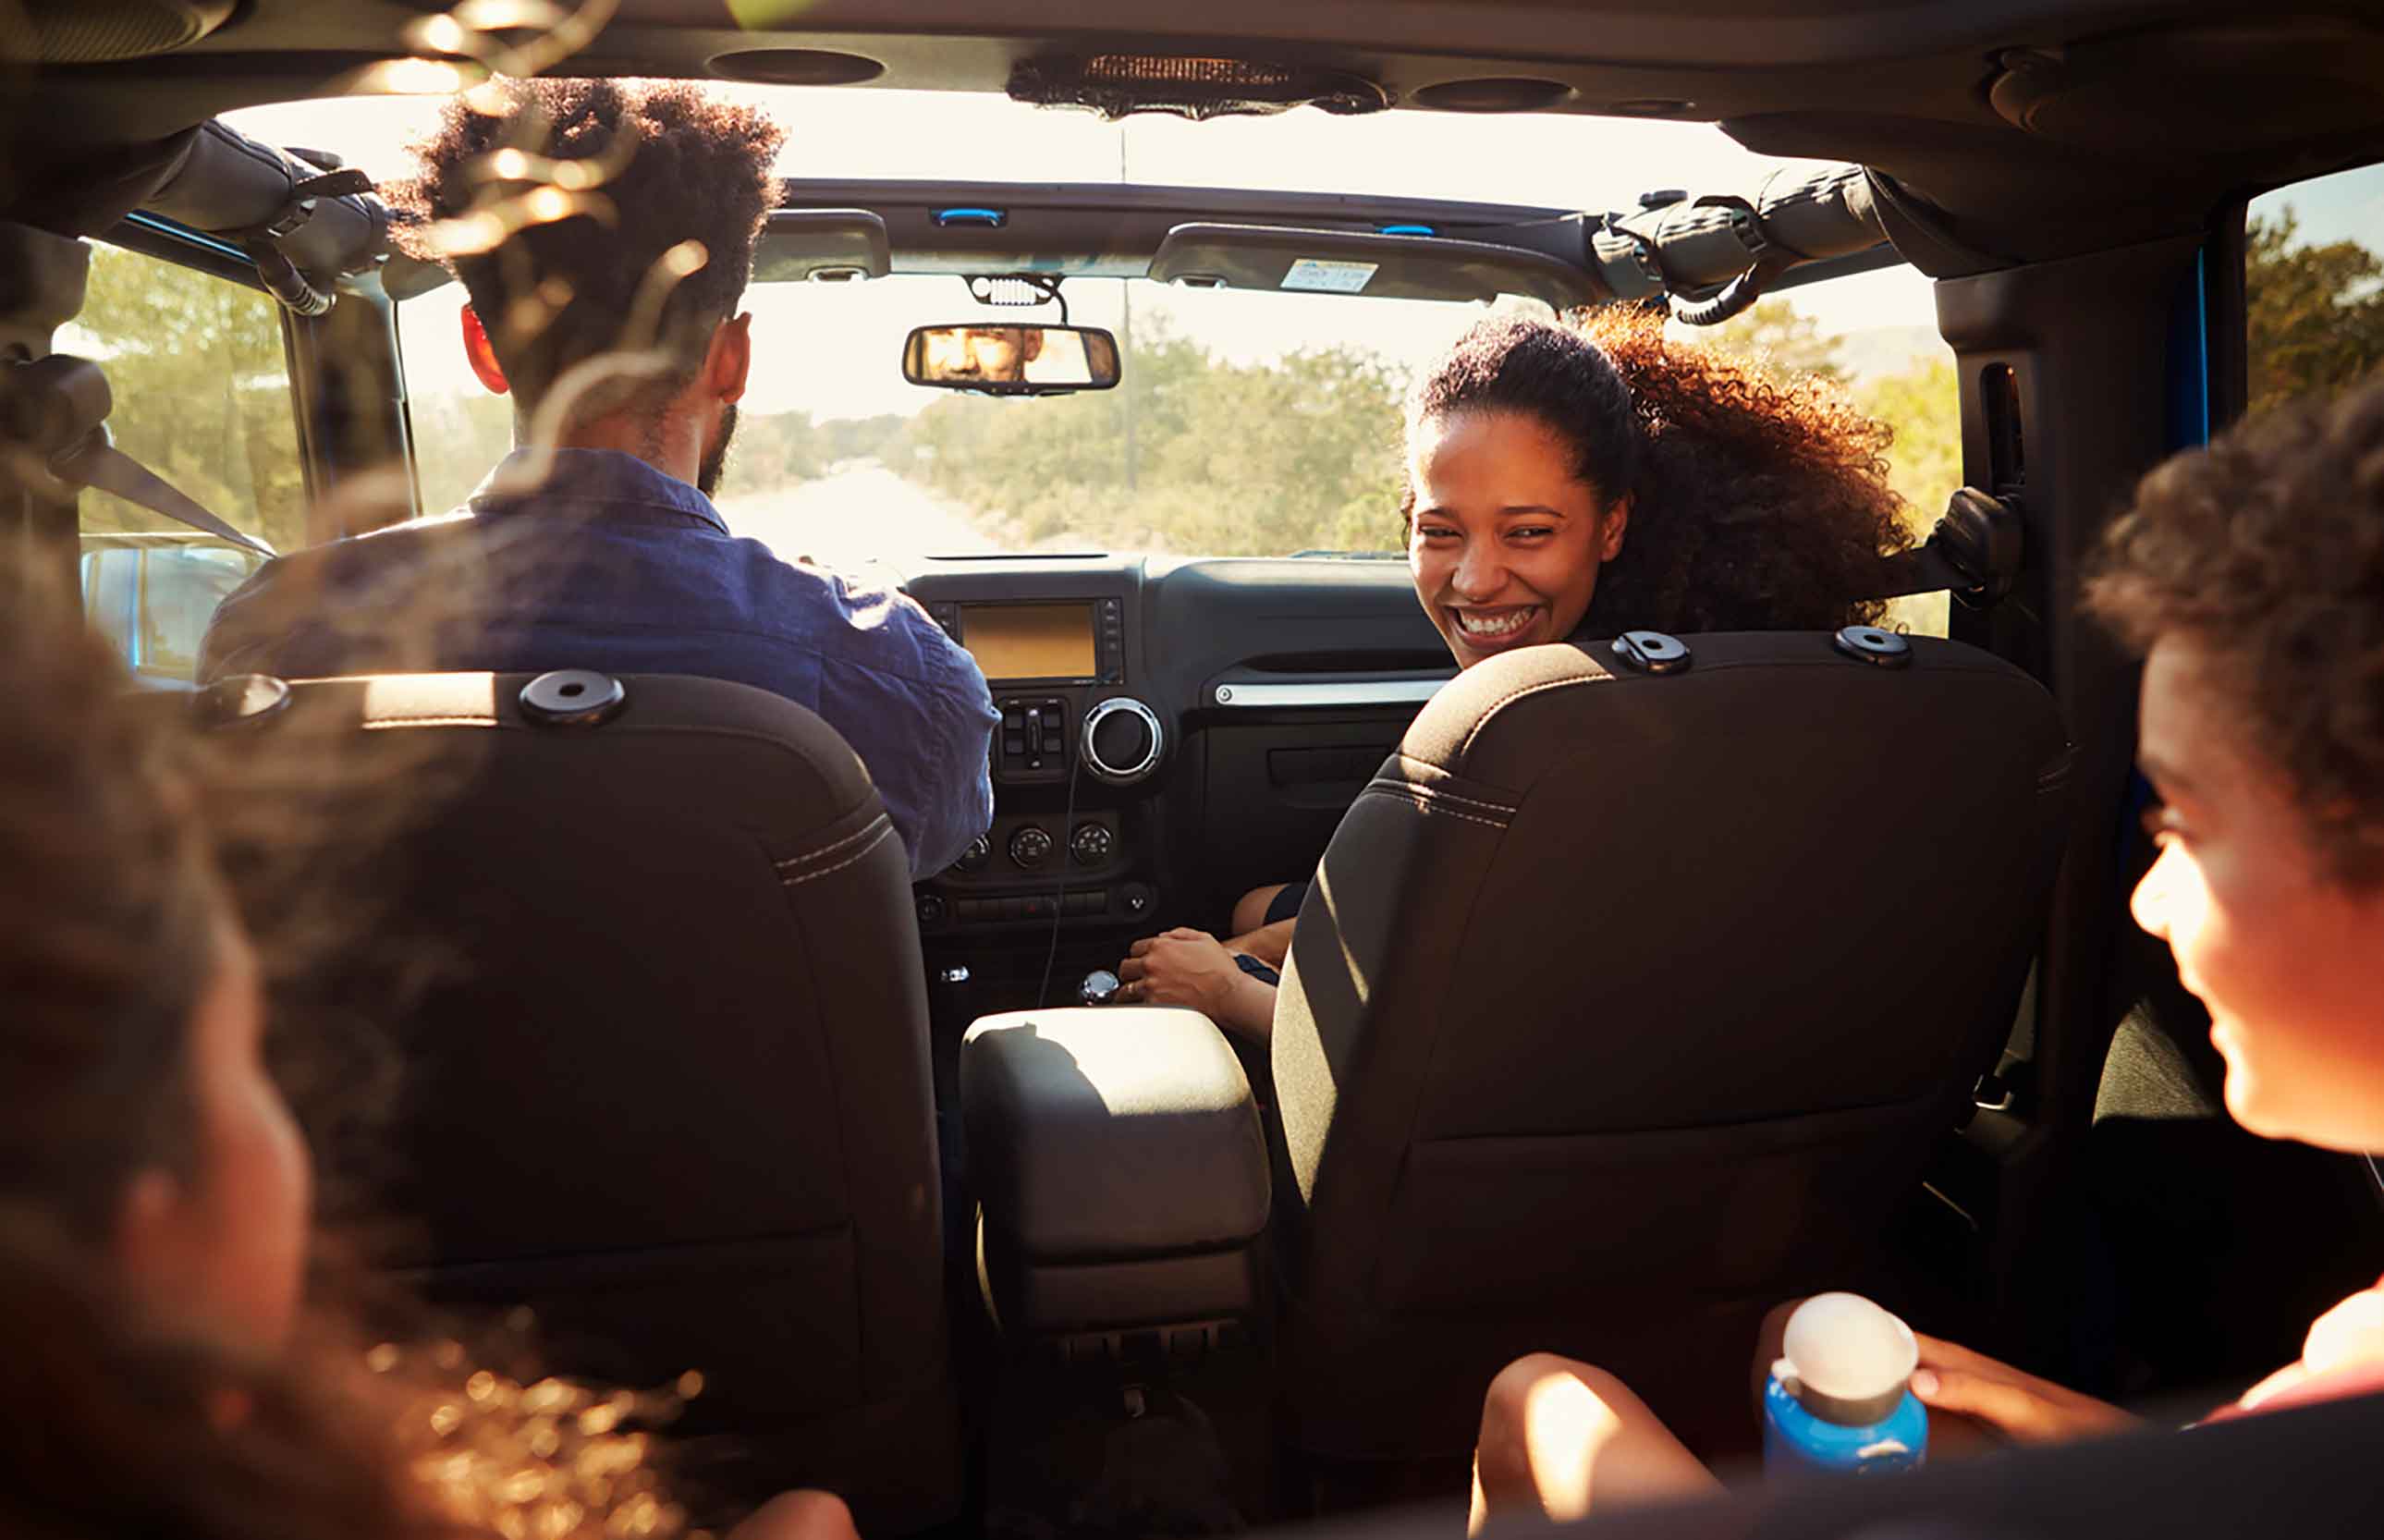 Gas can make summer road trips expensive, but the right credit card can earn some of that spending back.